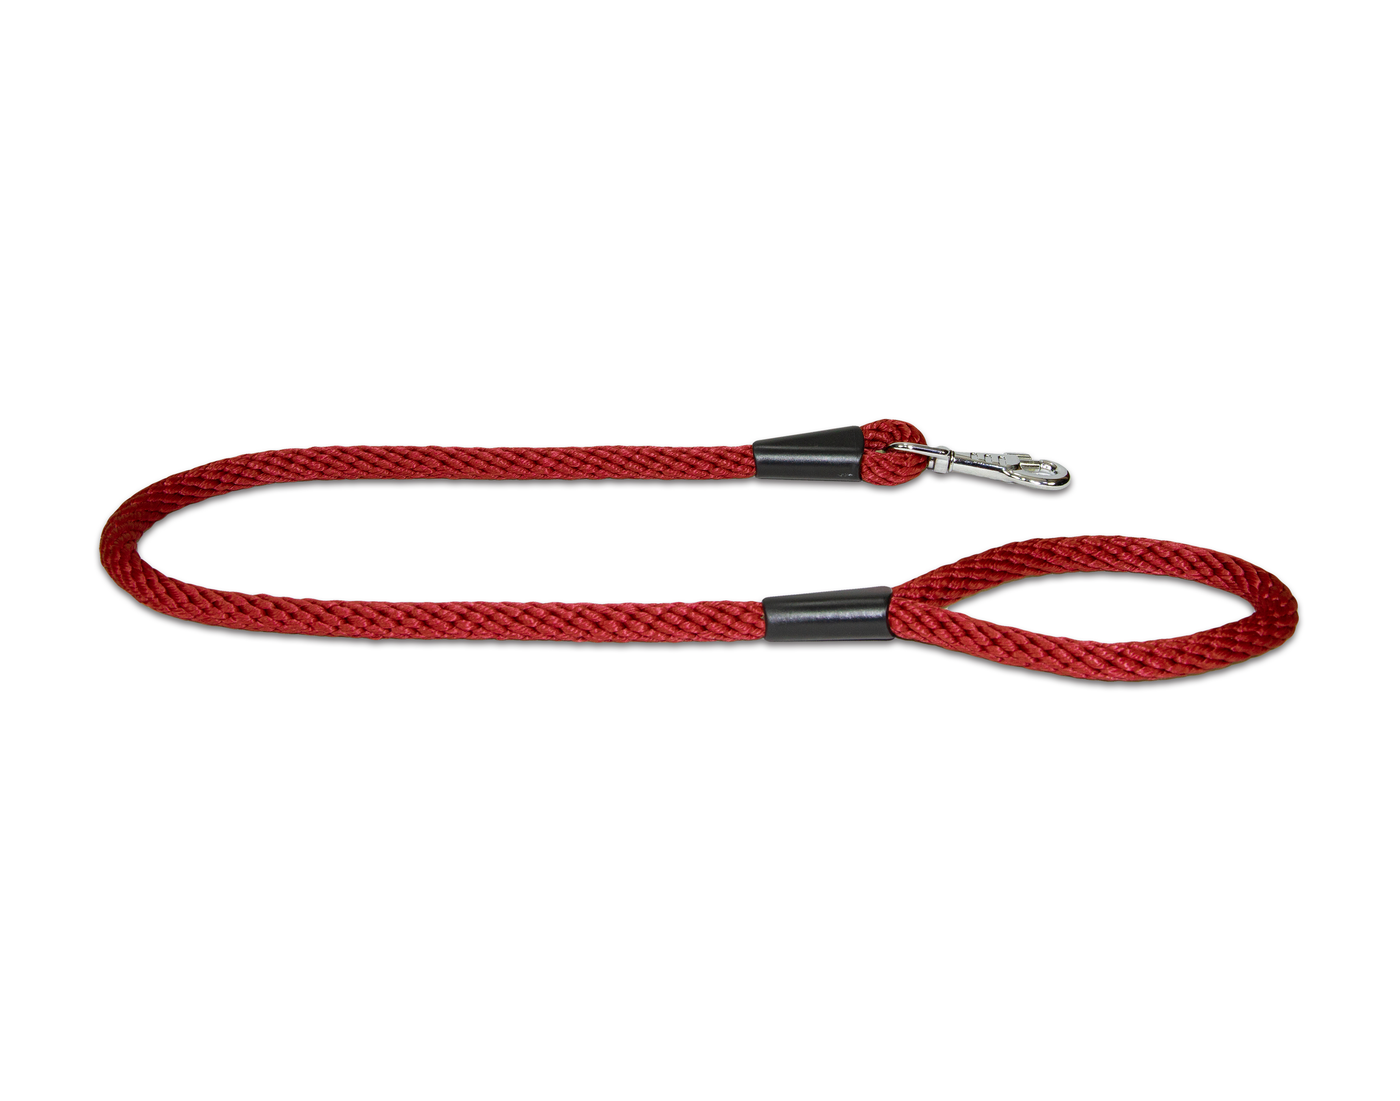 Burgundy rope dog lead in large